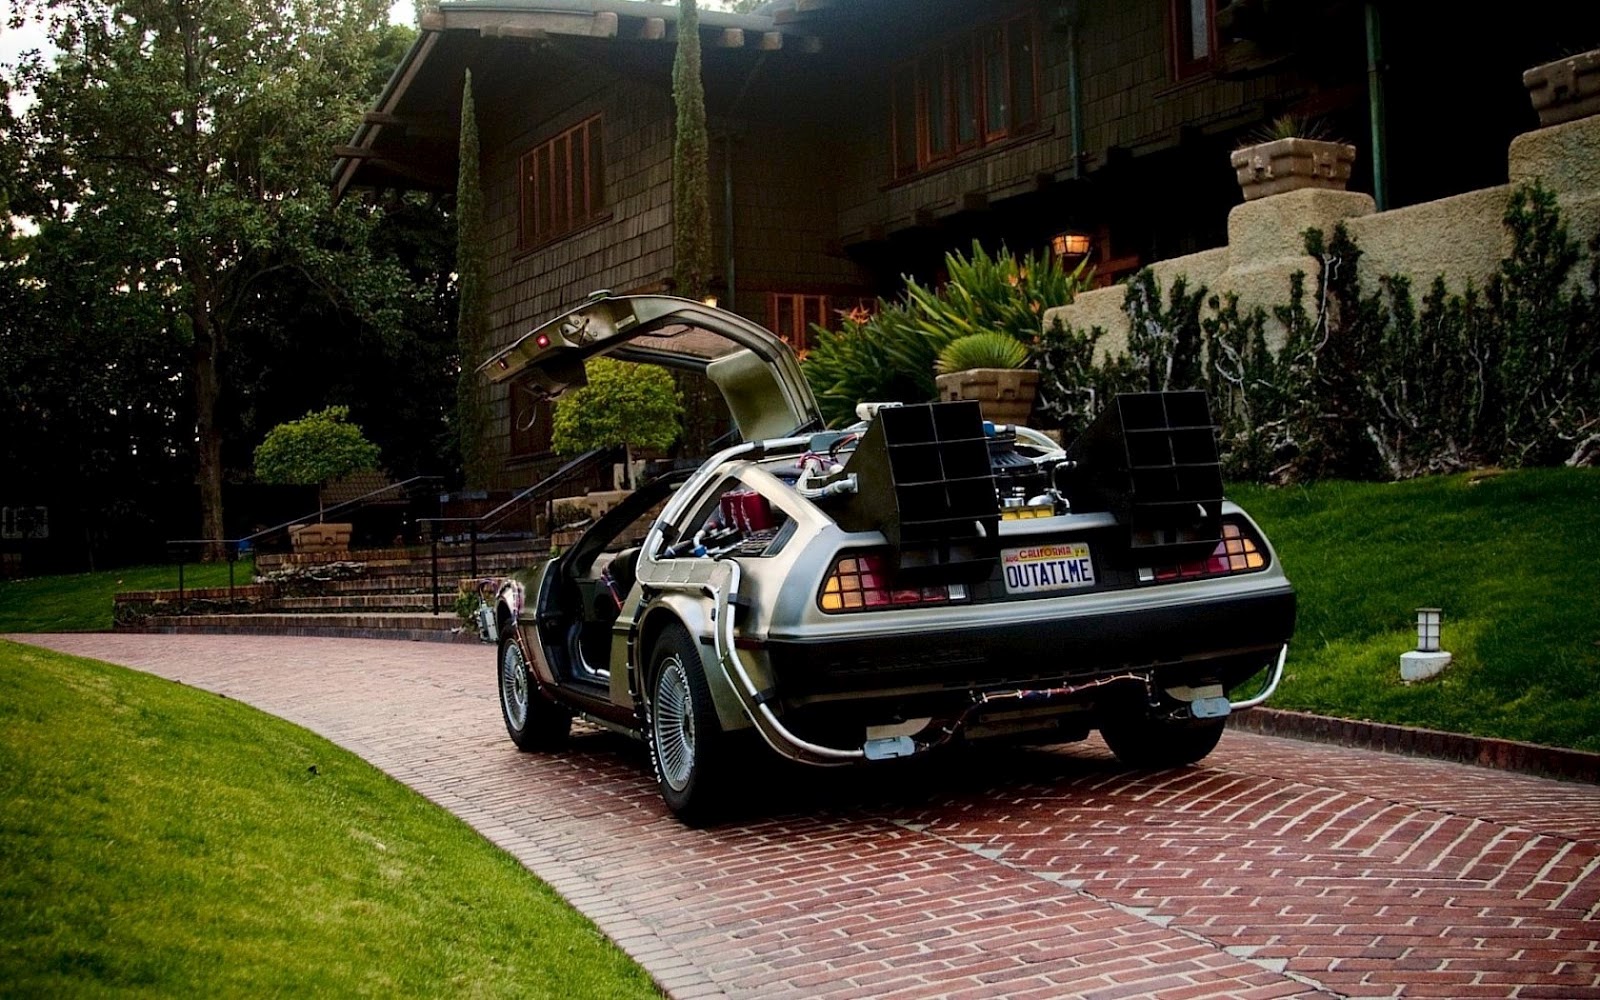  Car in Back To The Future Best High Quality Car Desktop Wallpapers in